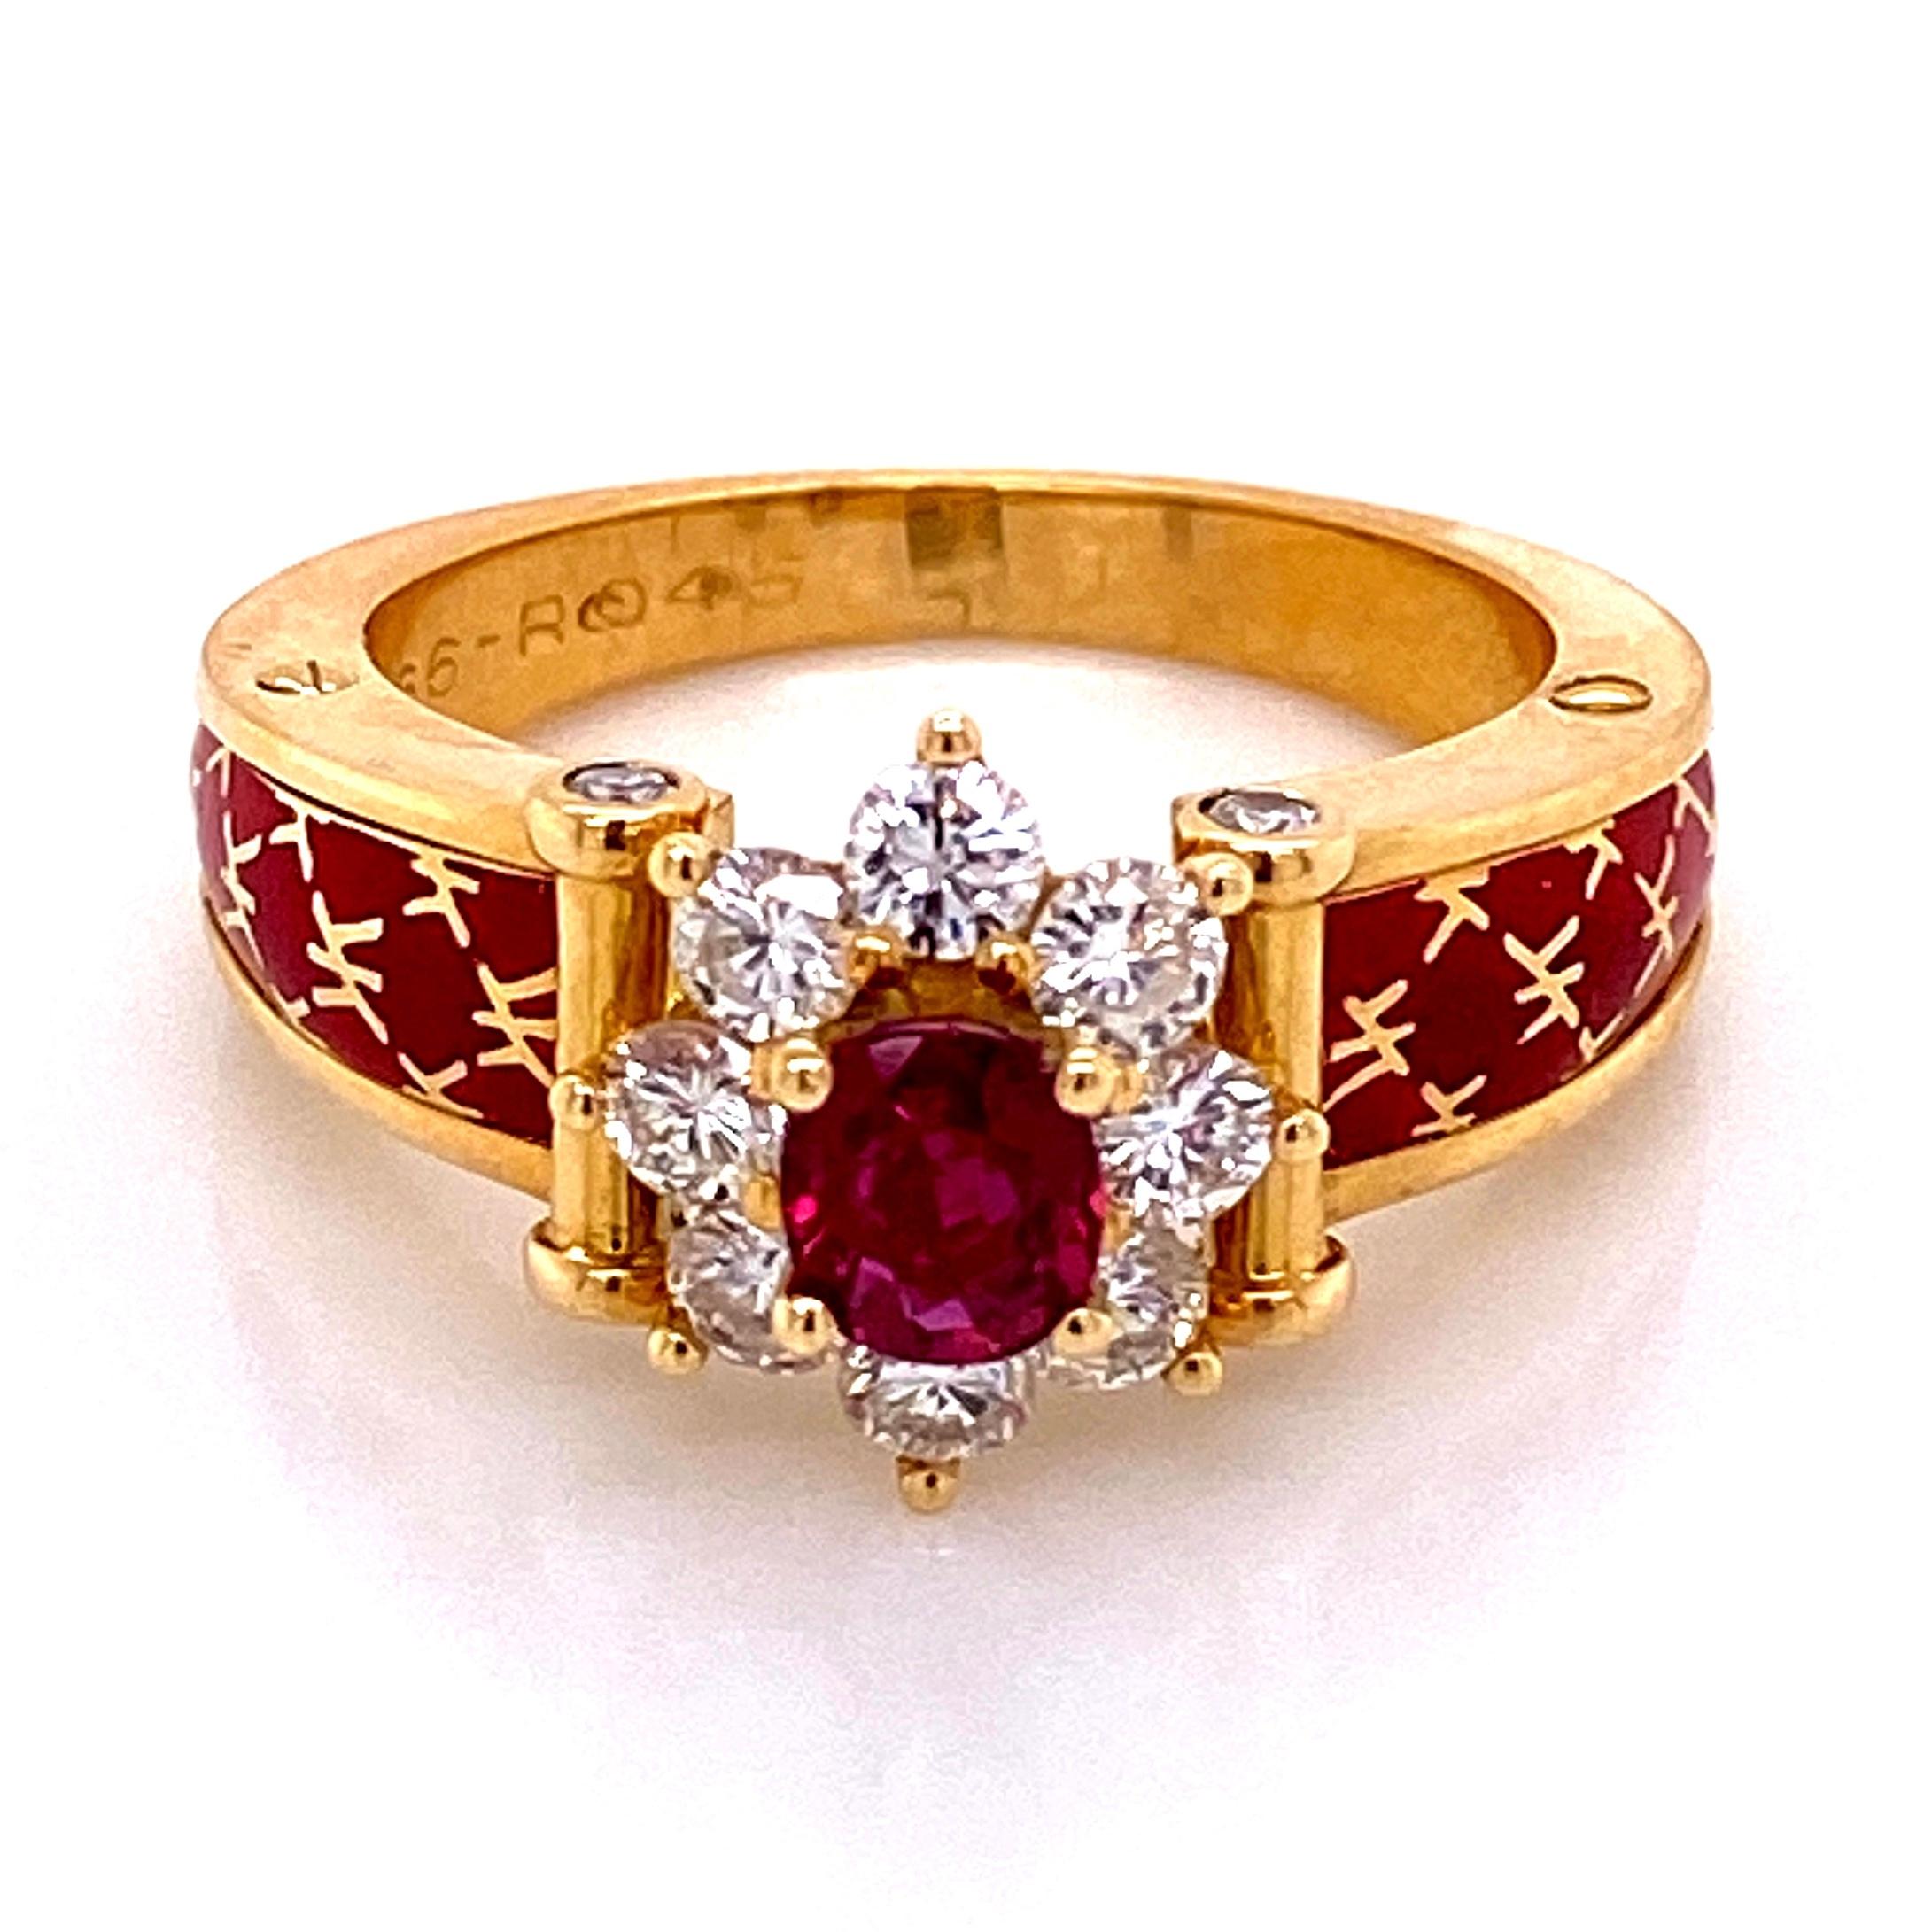 Modernist Vintage Ruby and Diamond Red Enamel Gold Ring France Fine Estate Jewelry